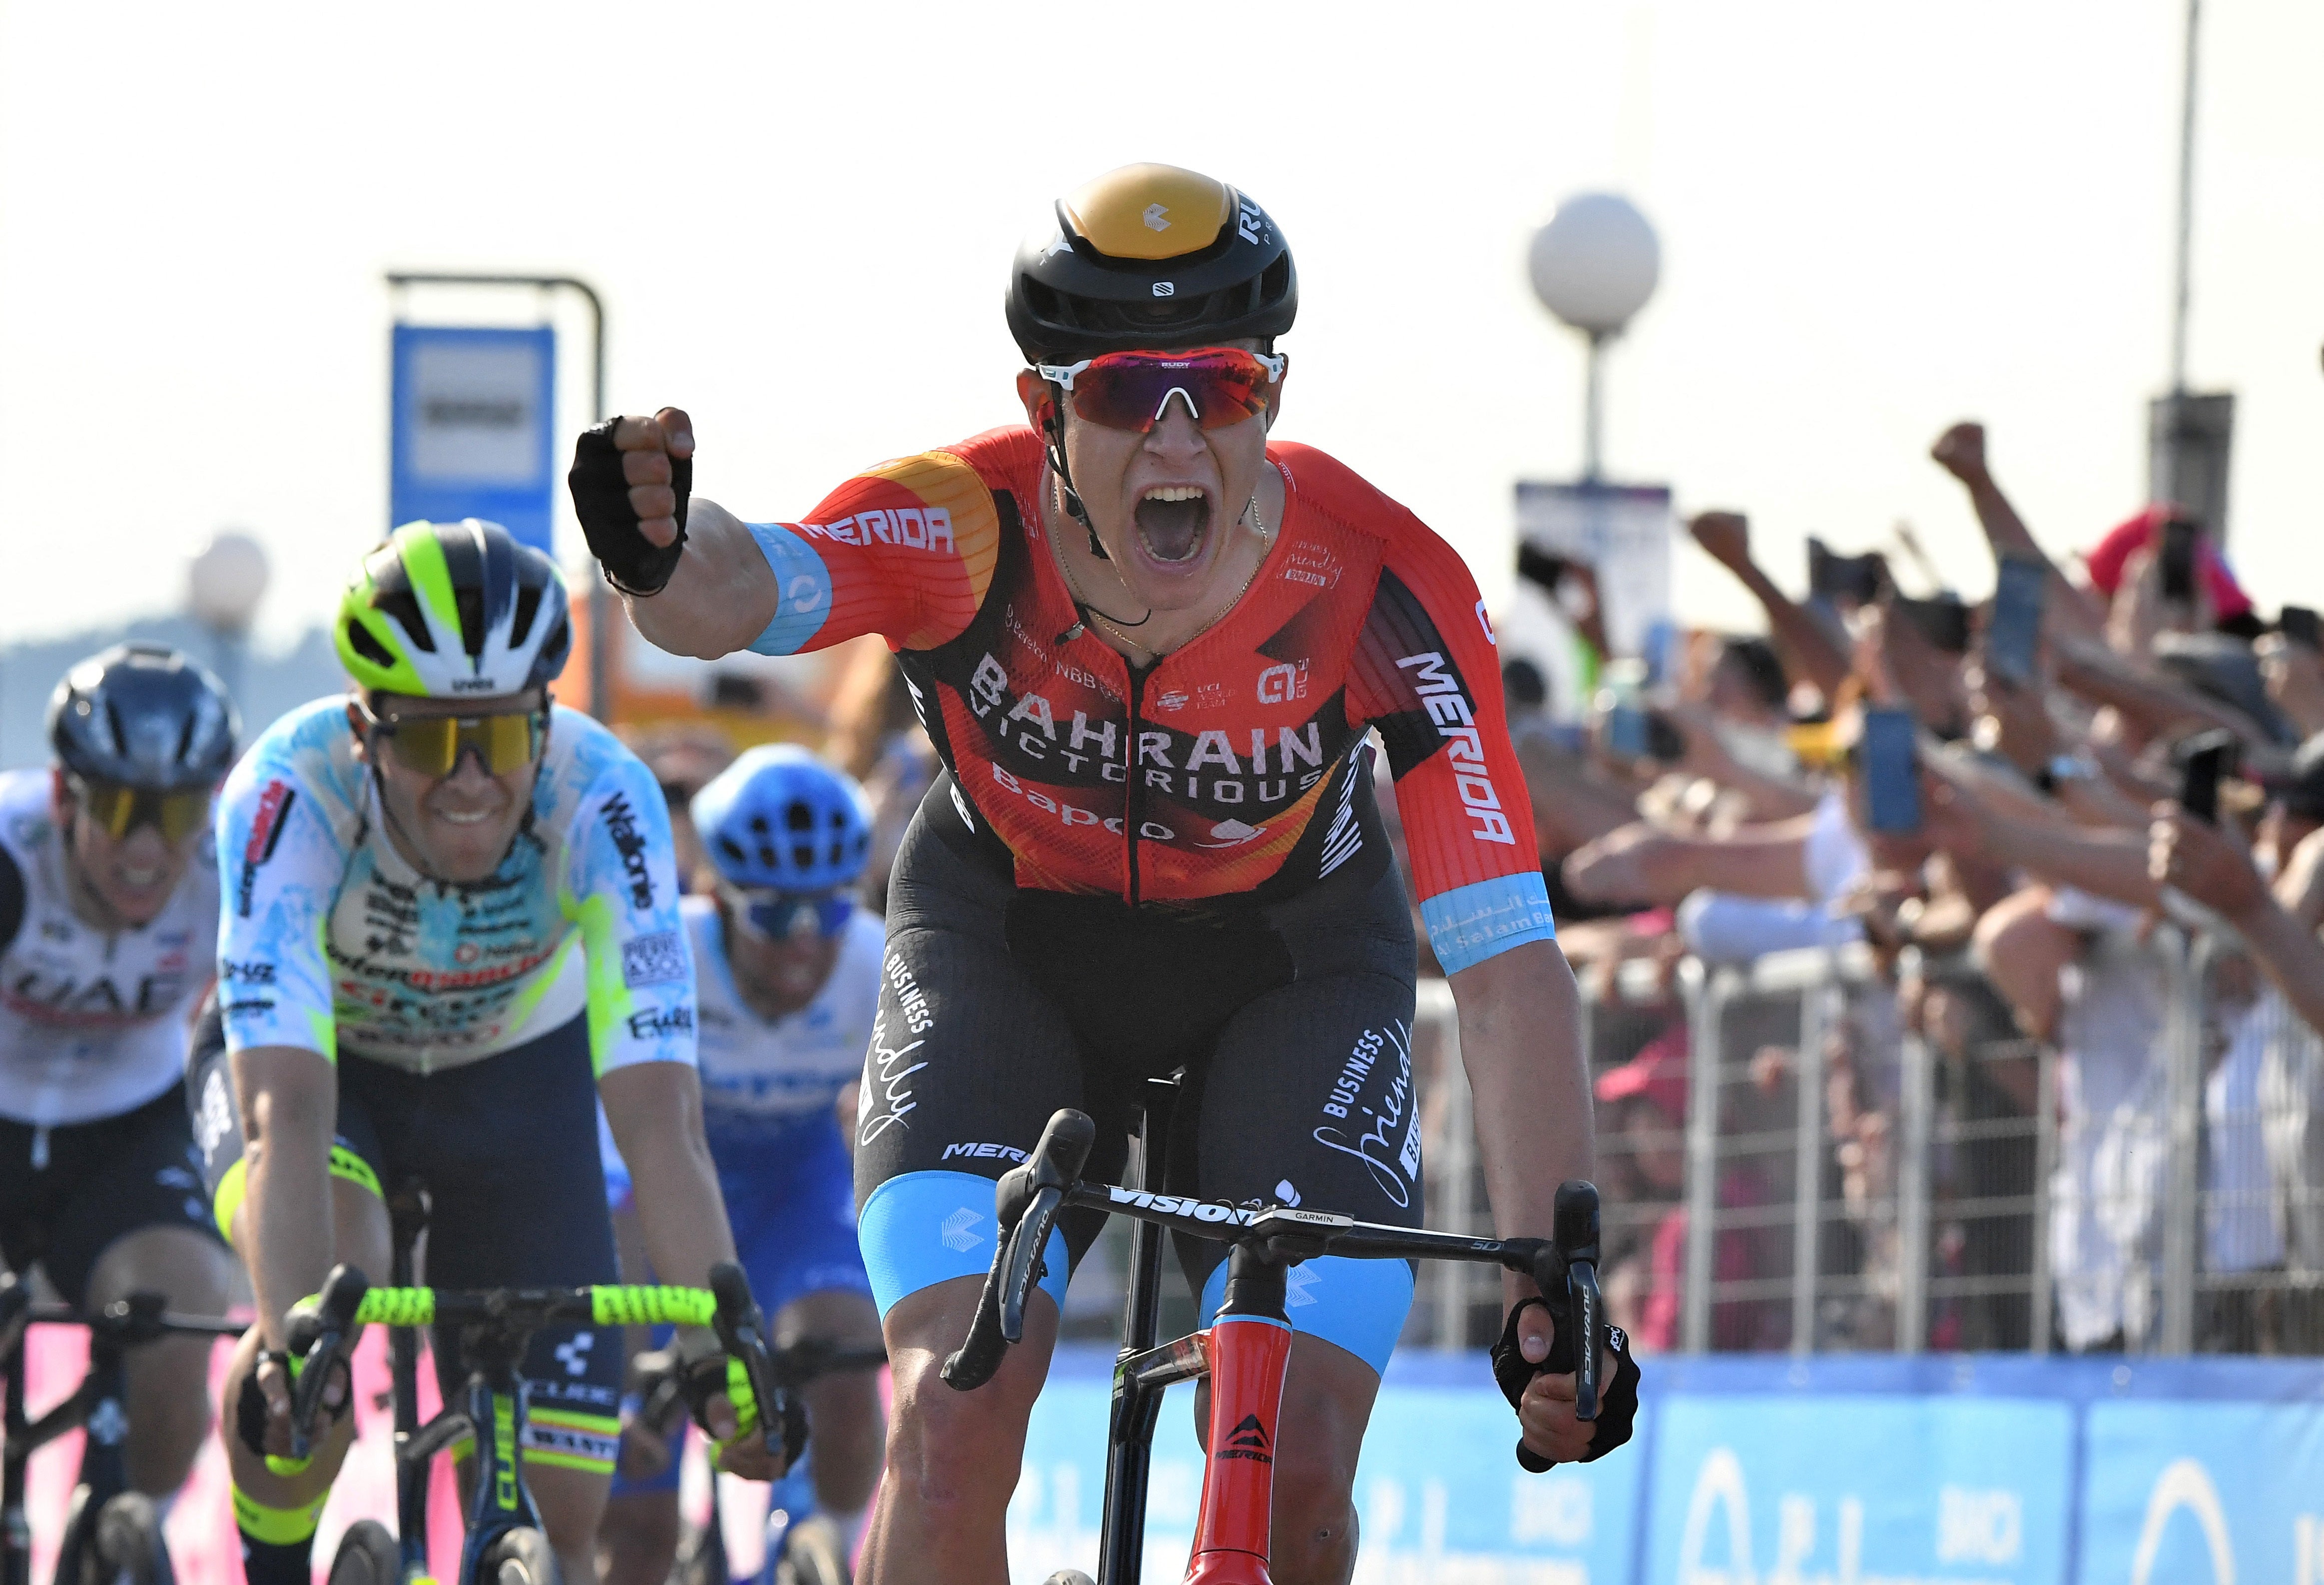 Jonathan Milan took advantage of the crash to win the stage